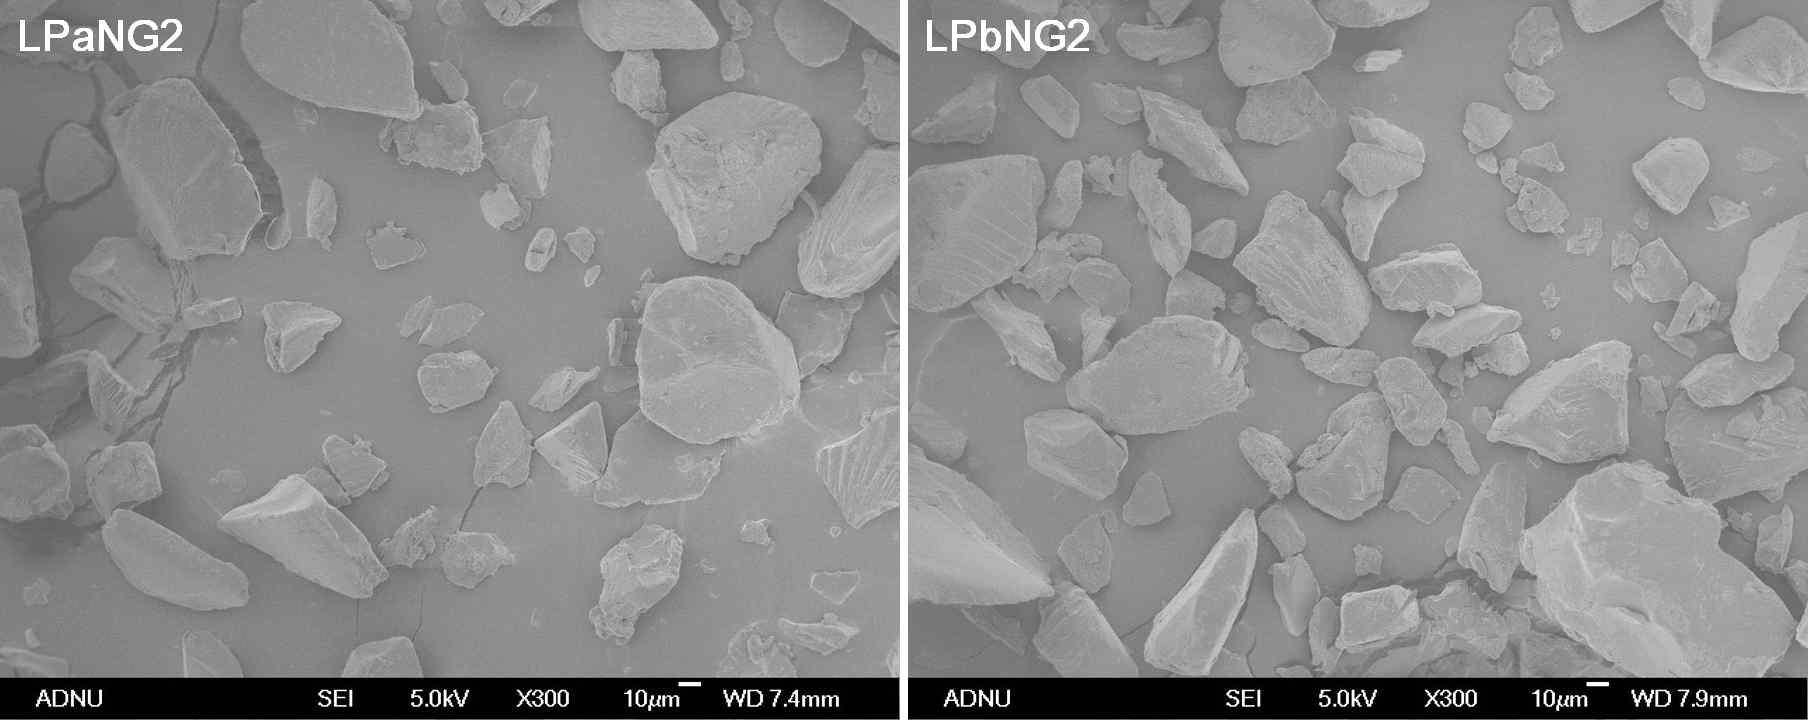 SEM images of control and starch citrates (LPaNG0-2 & LPbNG0-2) prepared through MLT plasma treatments